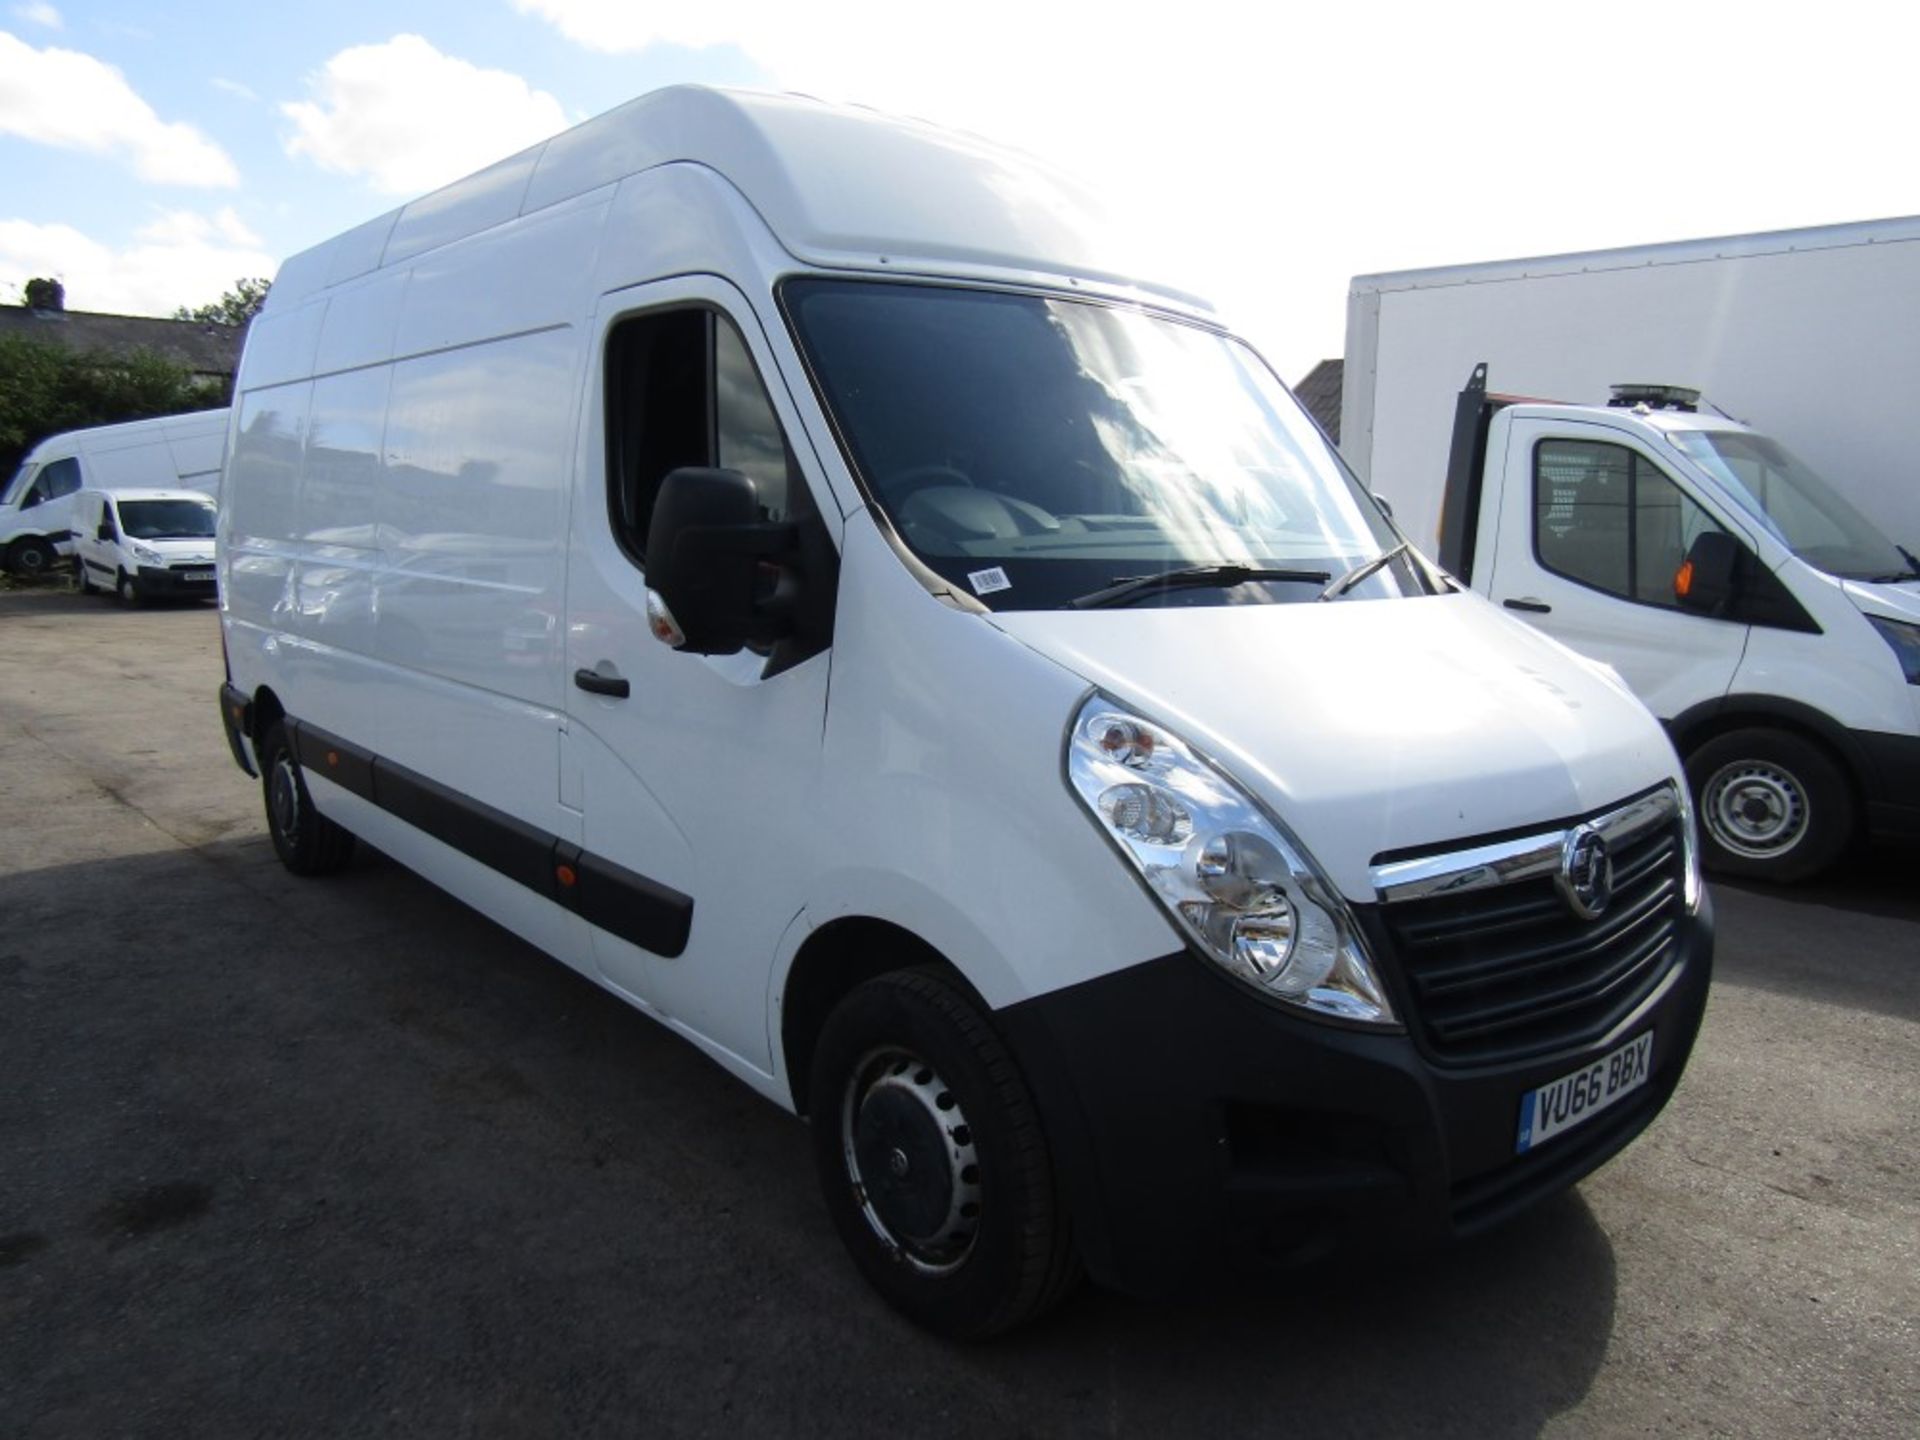 66 reg VAUXHALL MOVANO F3500 L3H3 CDTI, 1ST REG 09/16, TEST 09/22, 58452M, V5 HERE, 1 OWNER FROM NEW